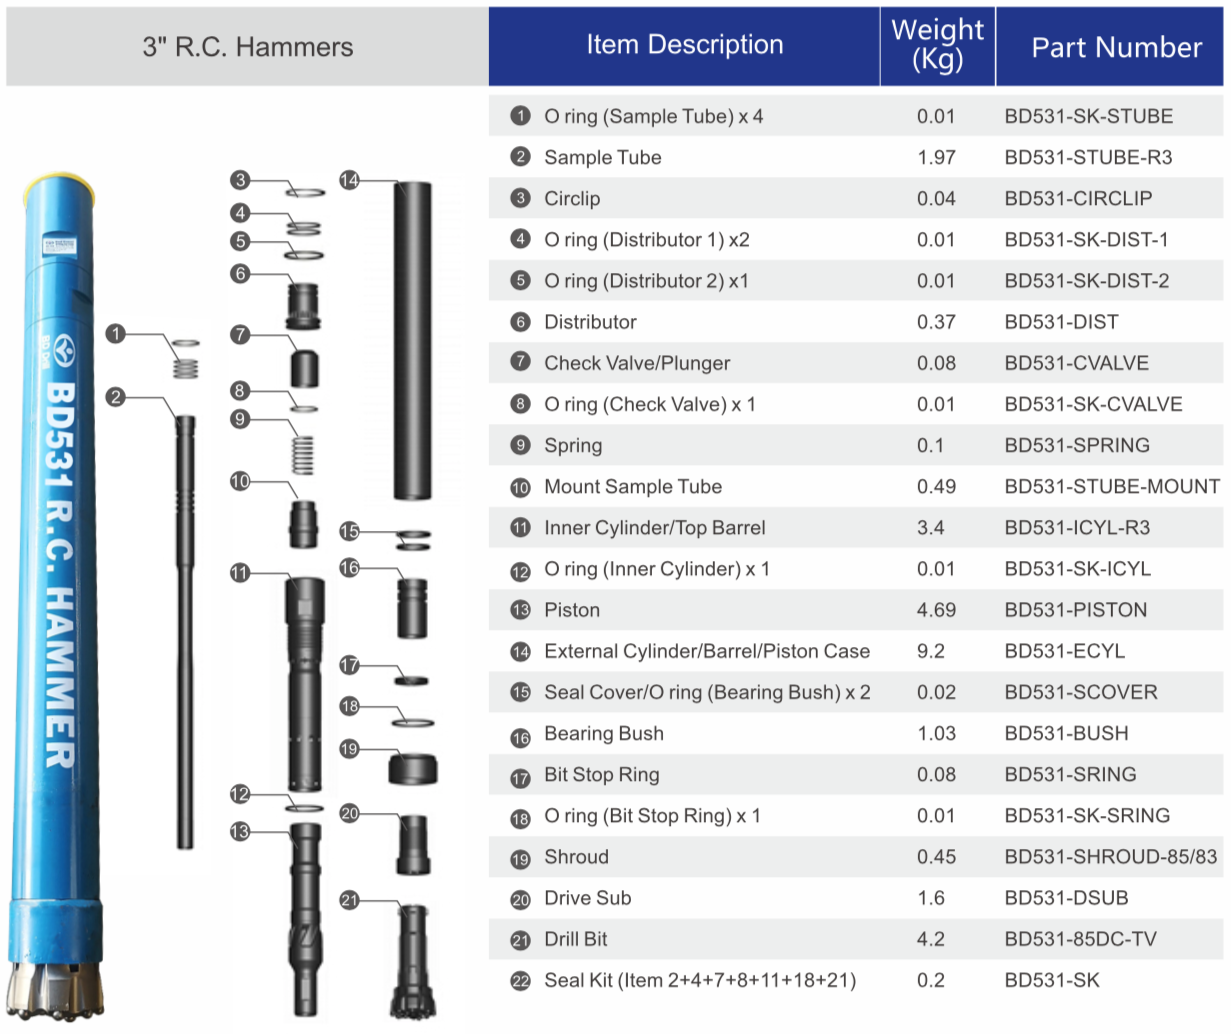  Black Diamond Drilling BD351 RC Reverse Circulation Hammer schematic and parts list